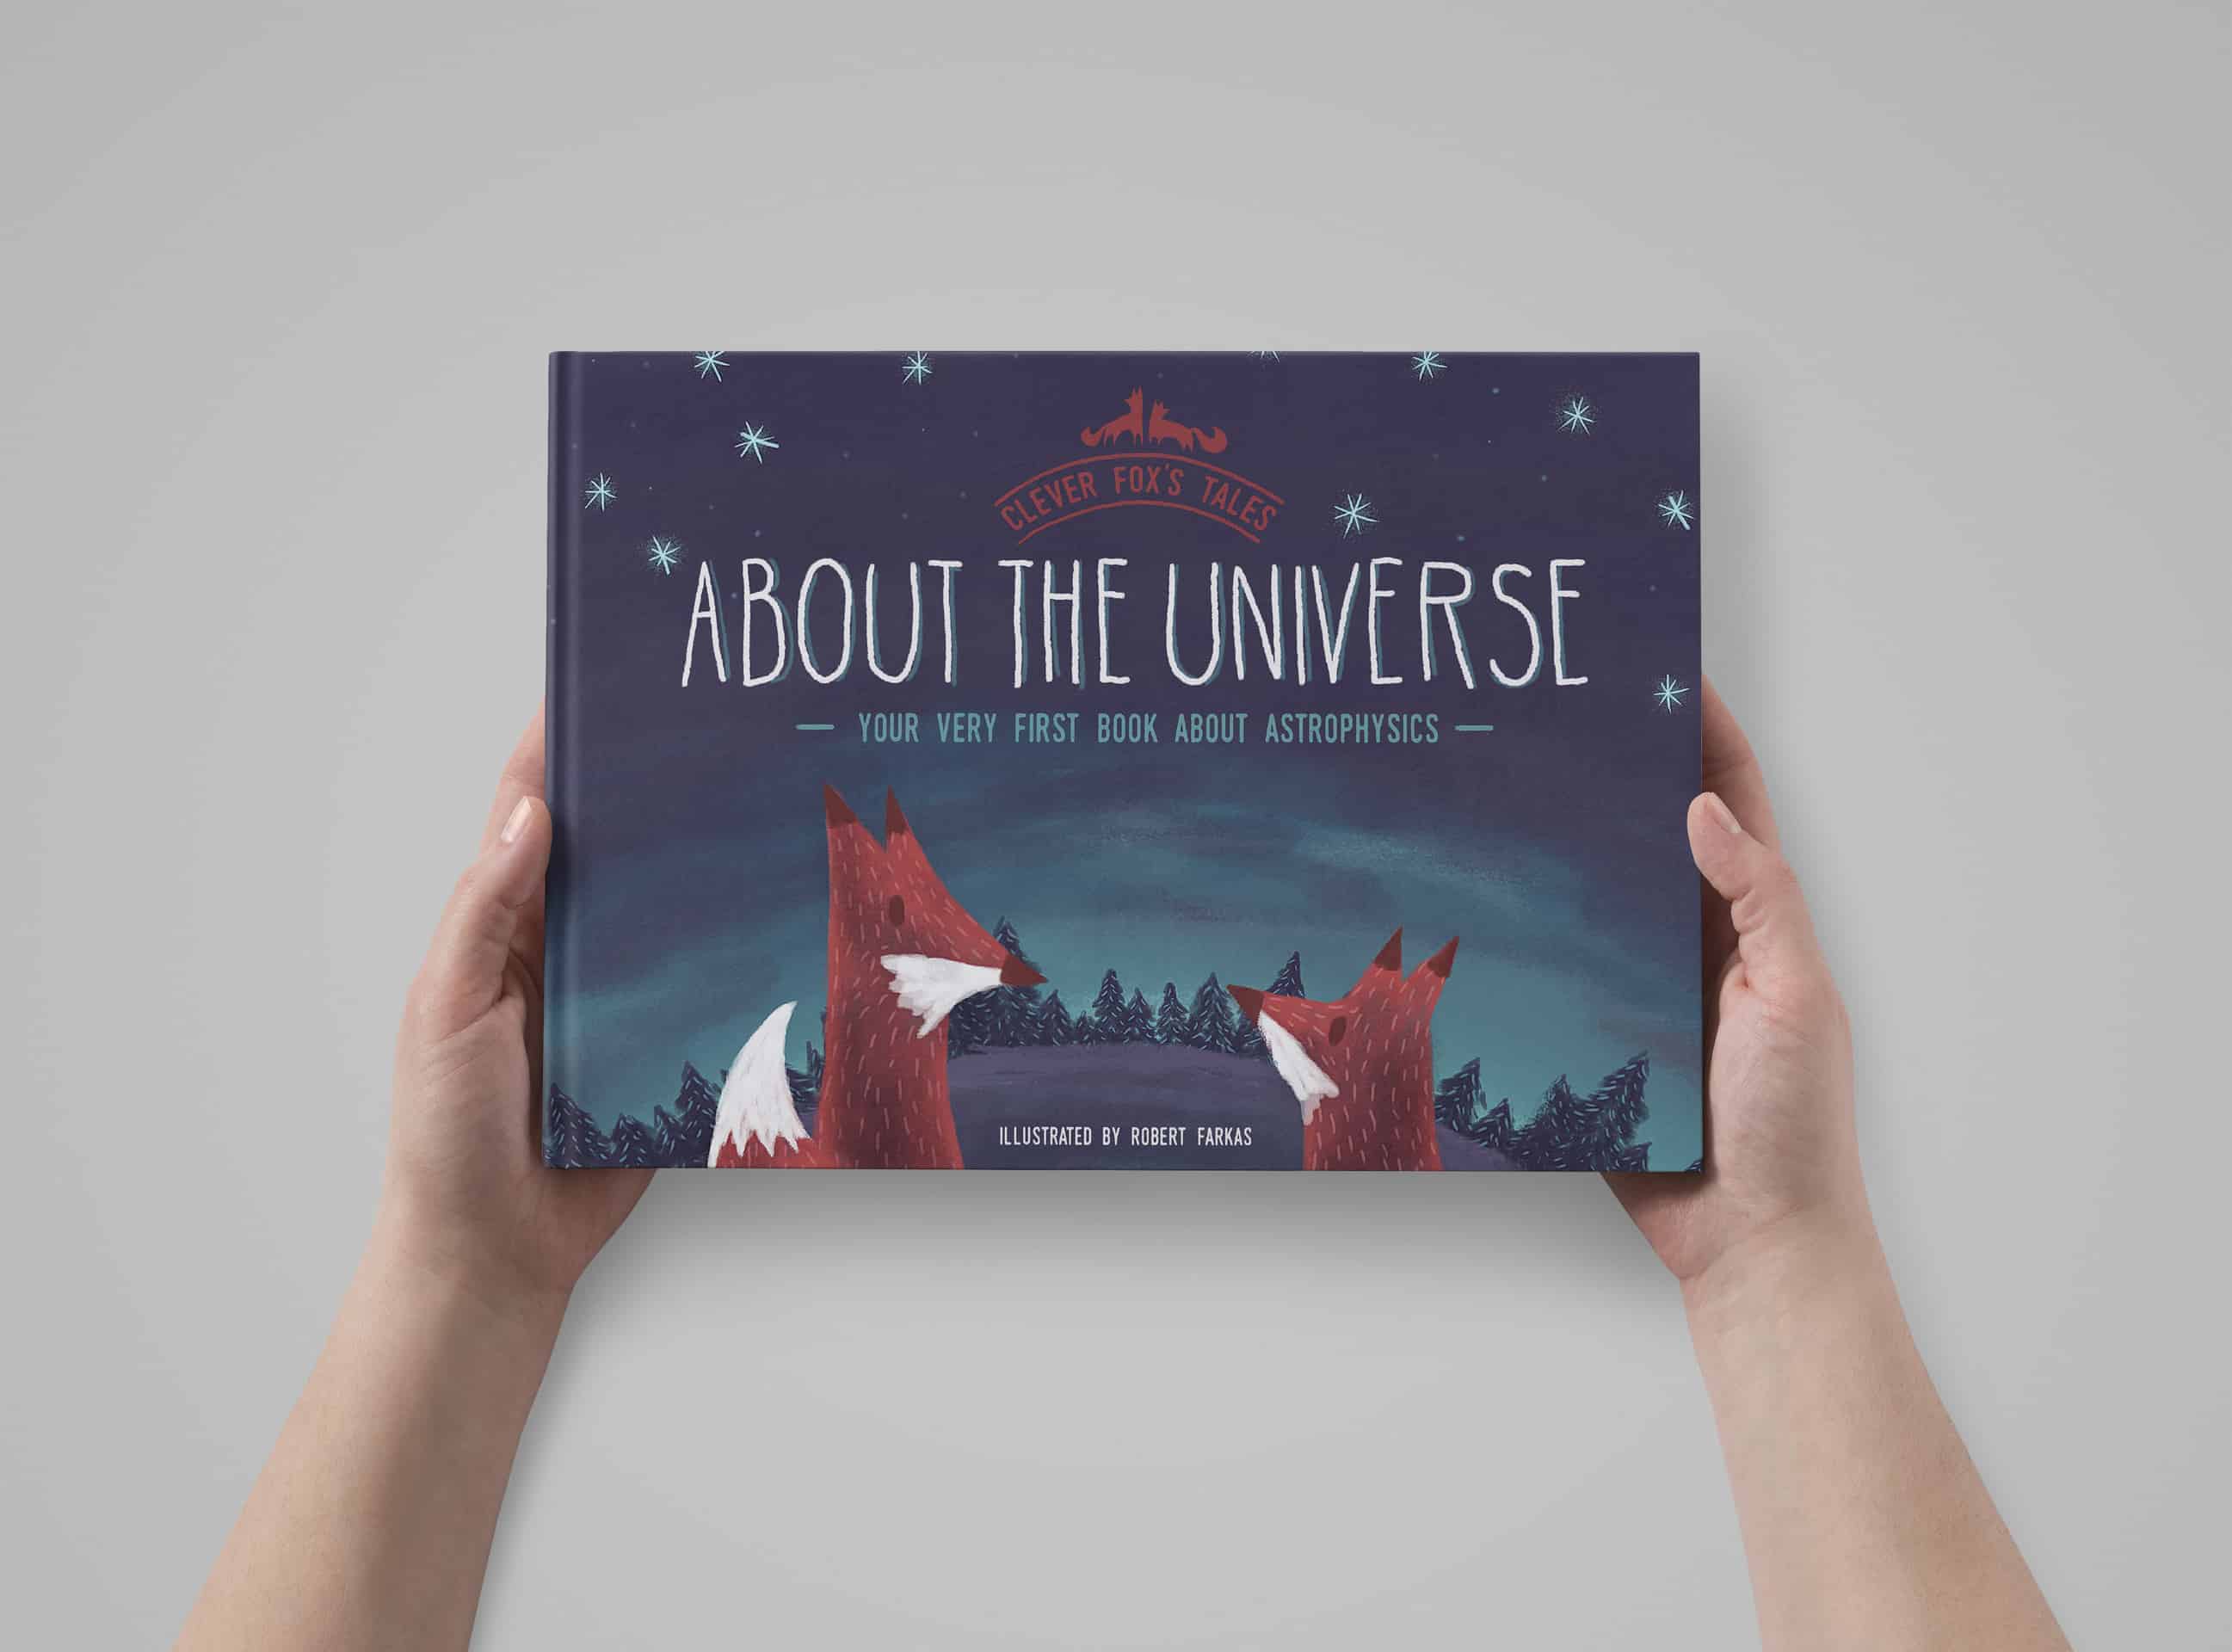 Clever Fox's Tales About the Universe